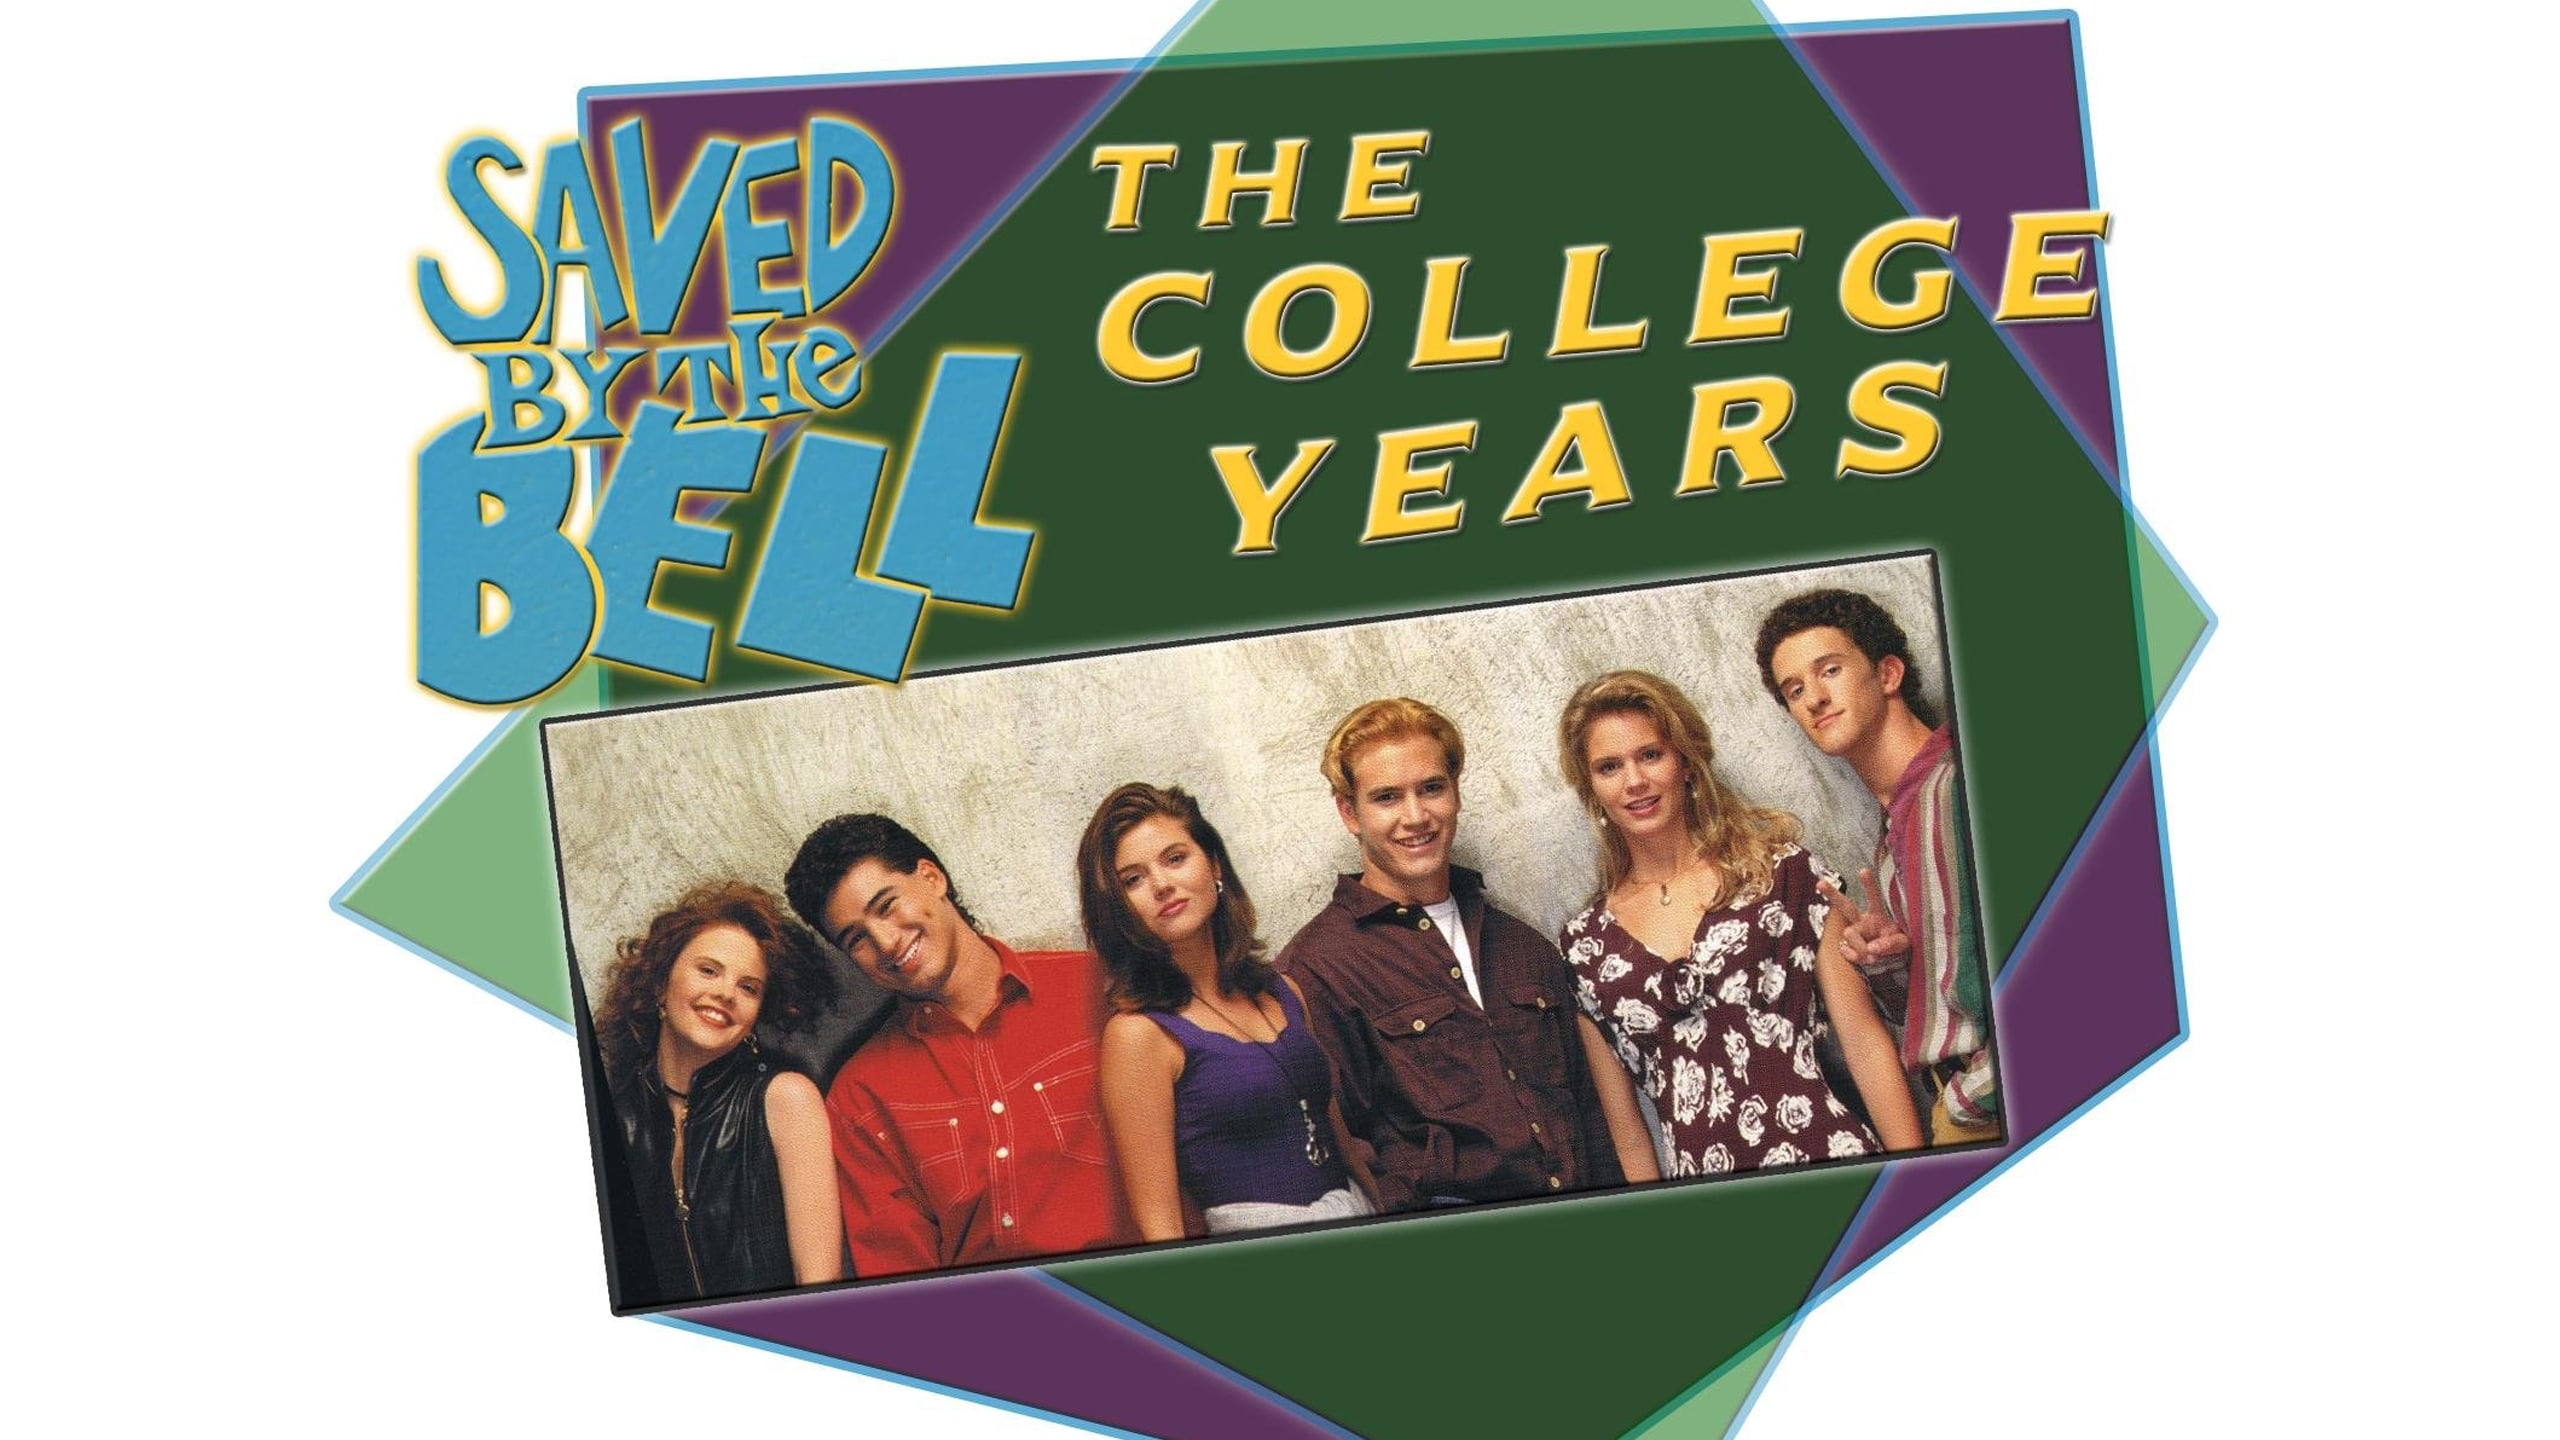 Watch Saved by the Bell: The College Years Online